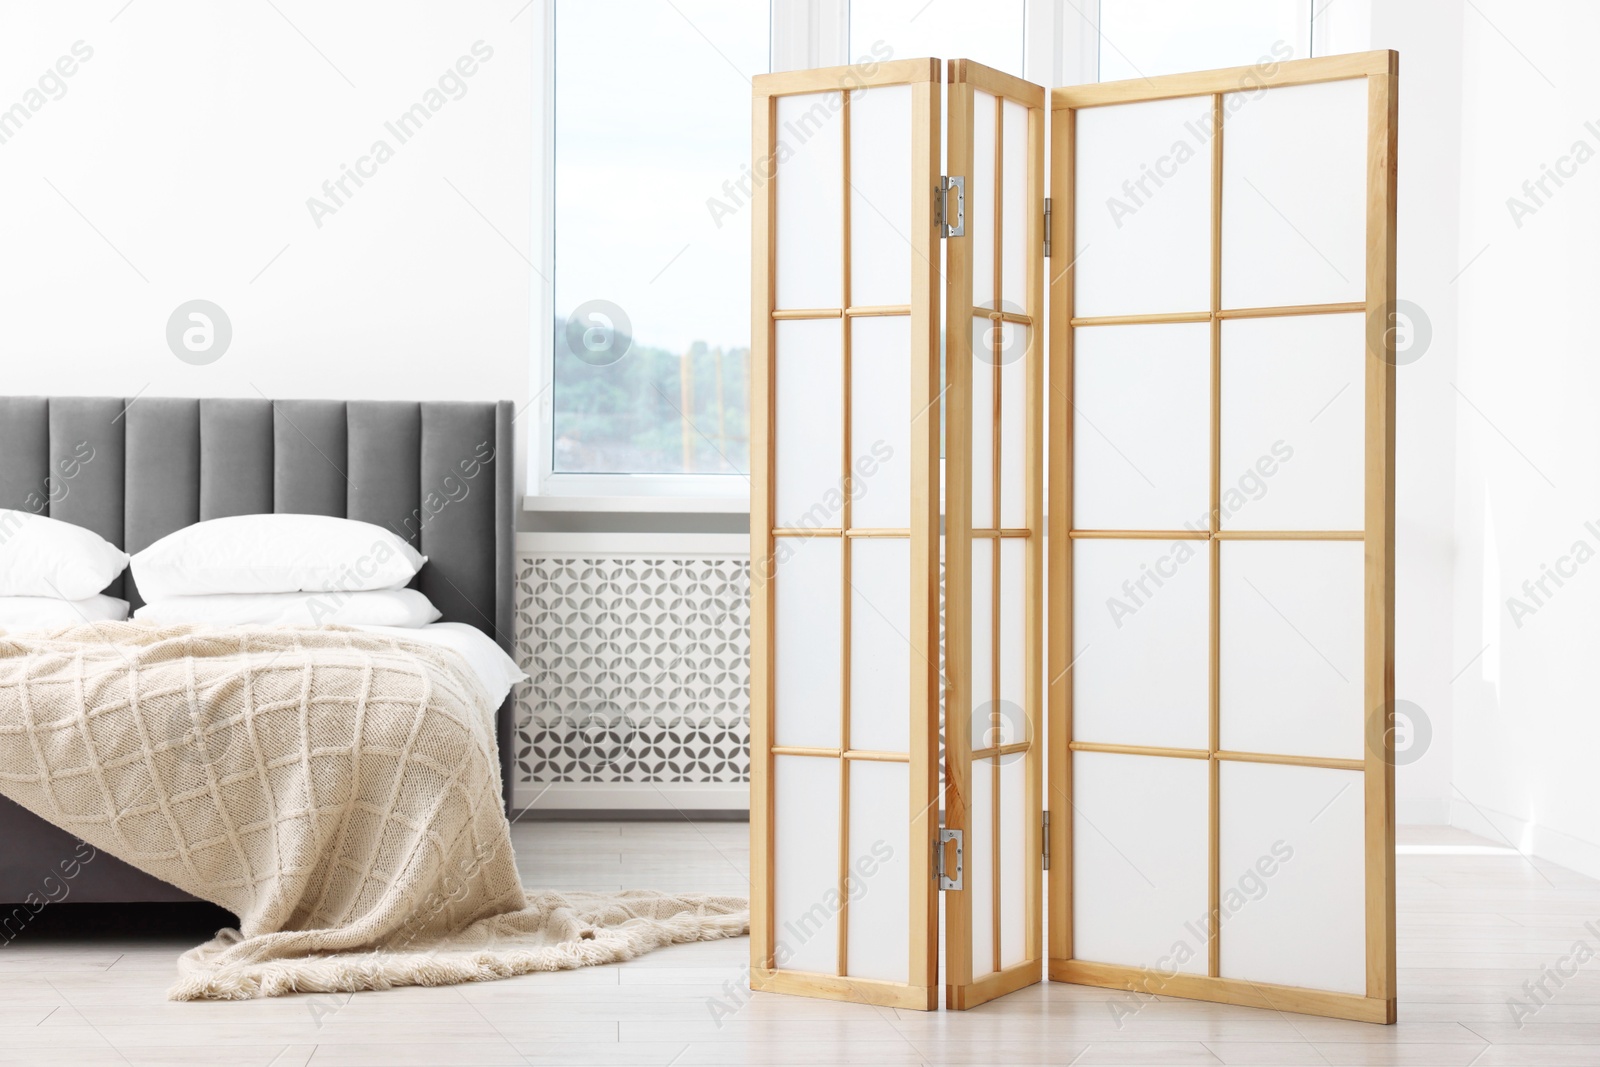 Photo of Folding screen and comfortable bed in bedroom